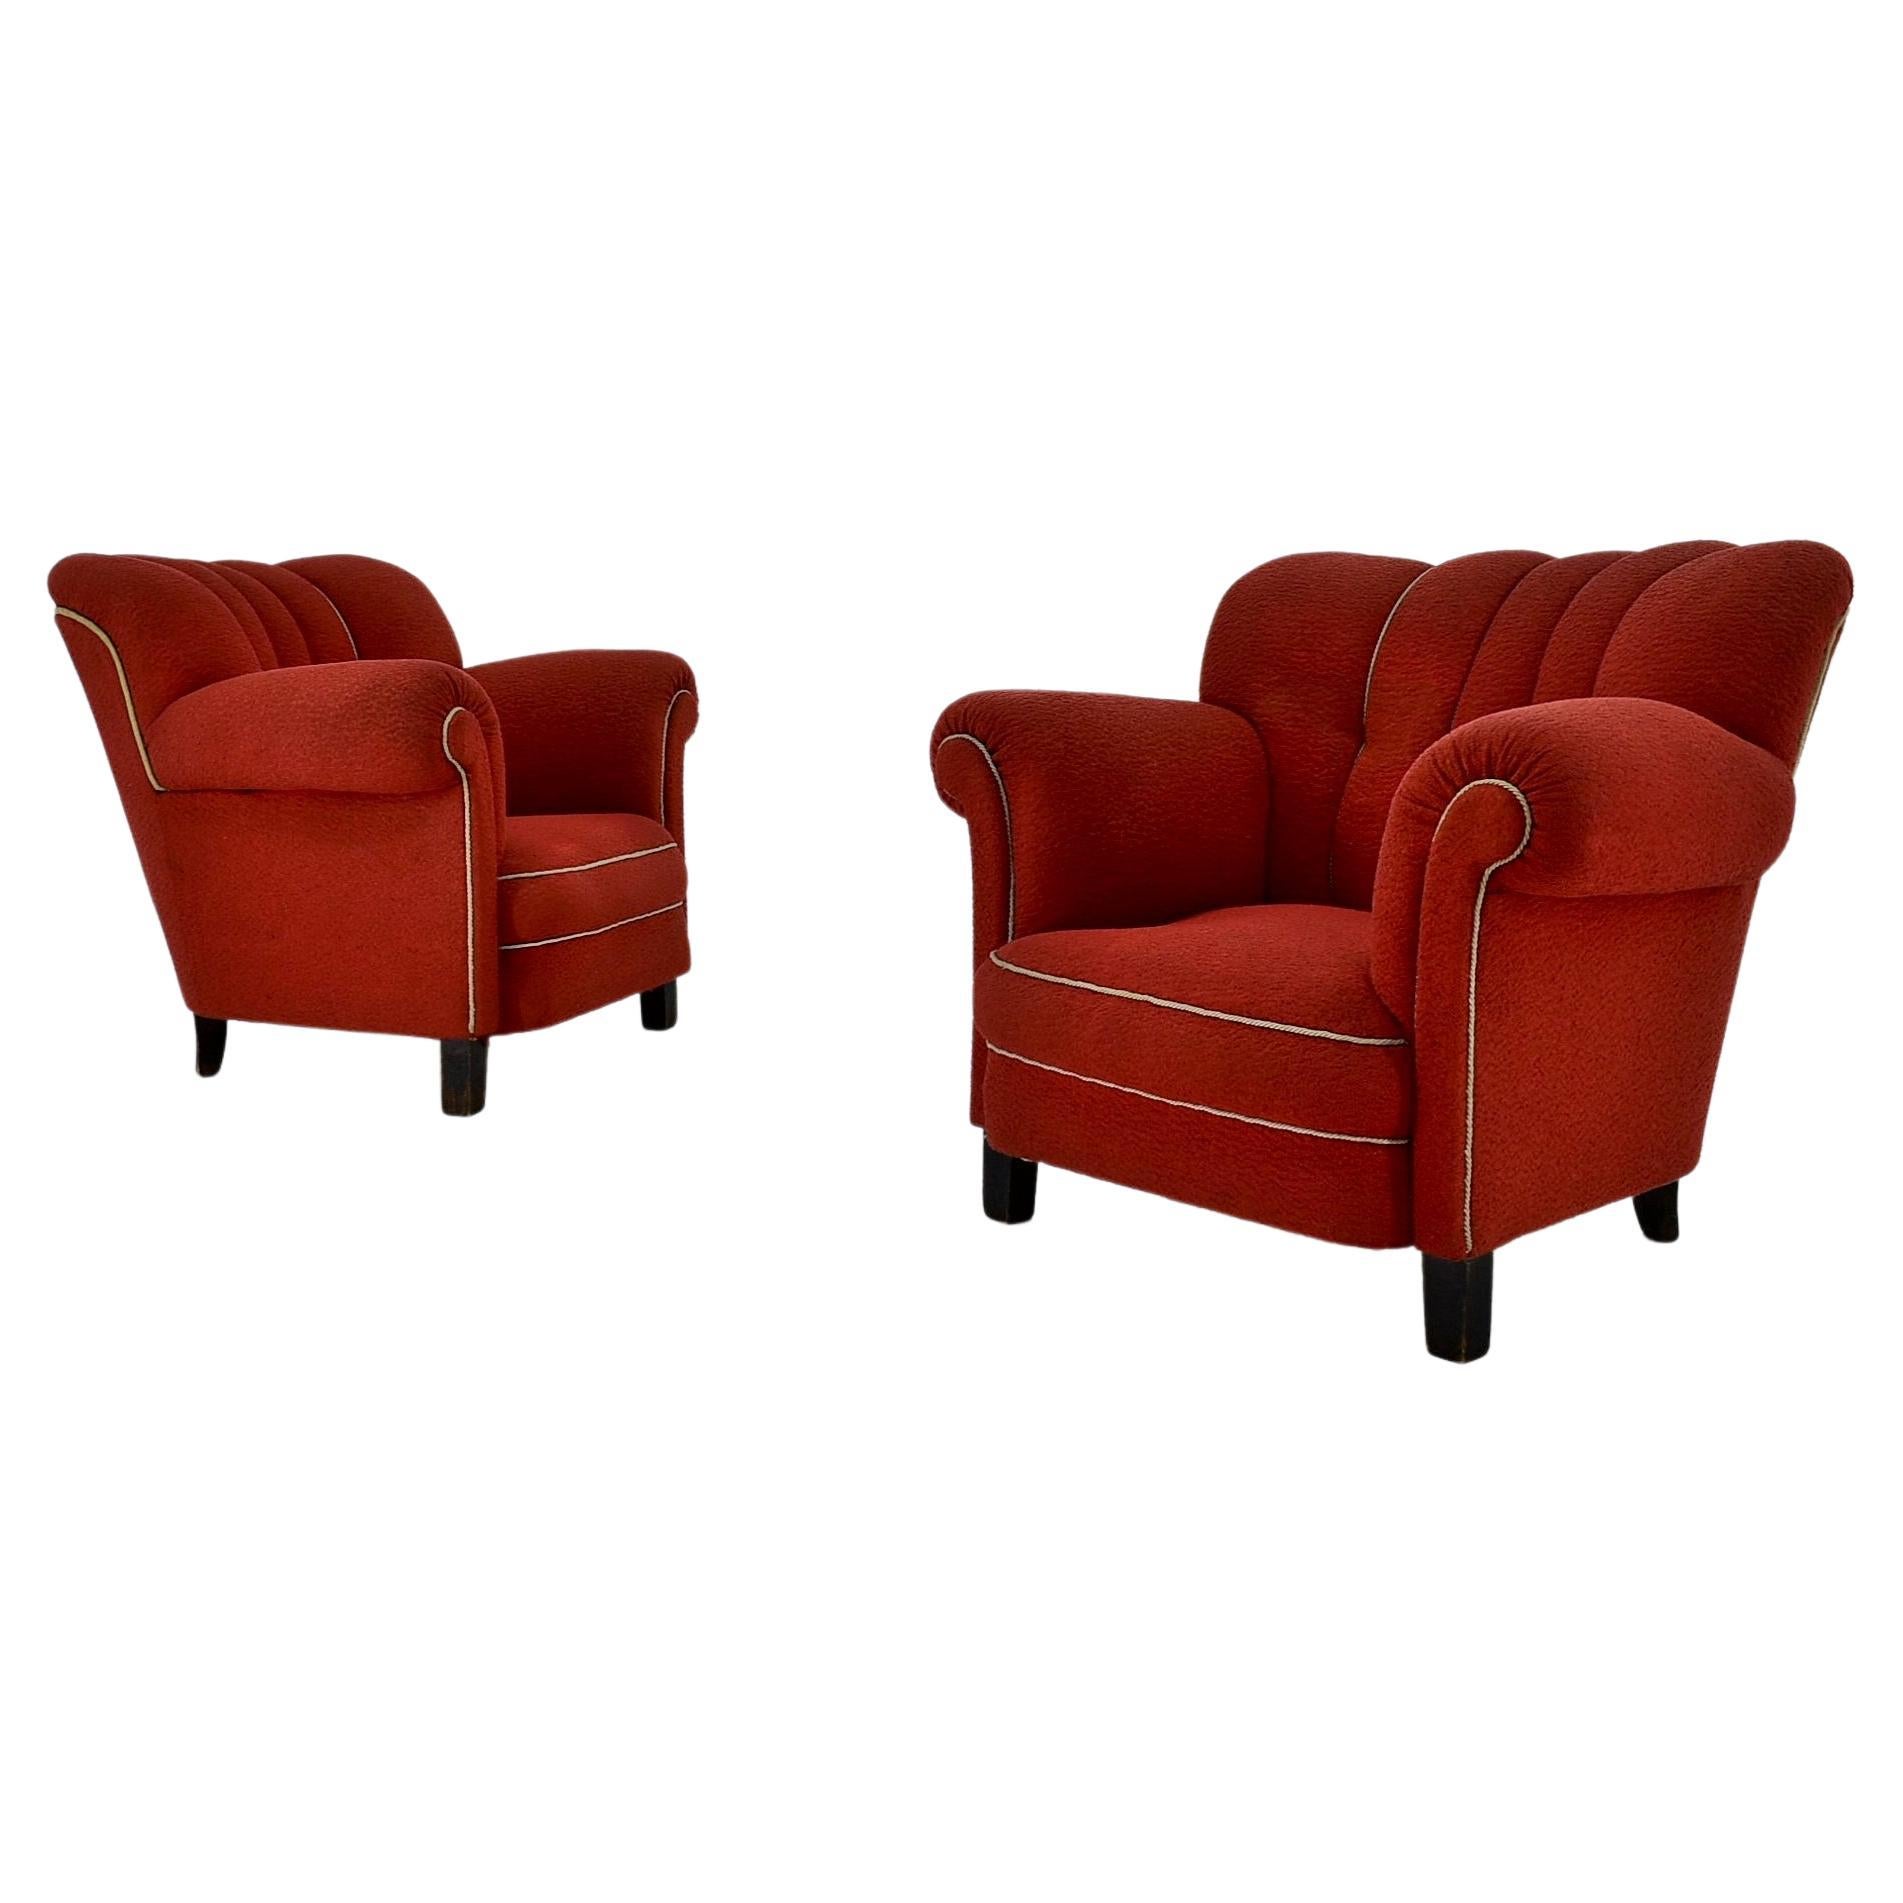 Set of Two Design Art Deco, Club Armchairs, 1935s For Sale